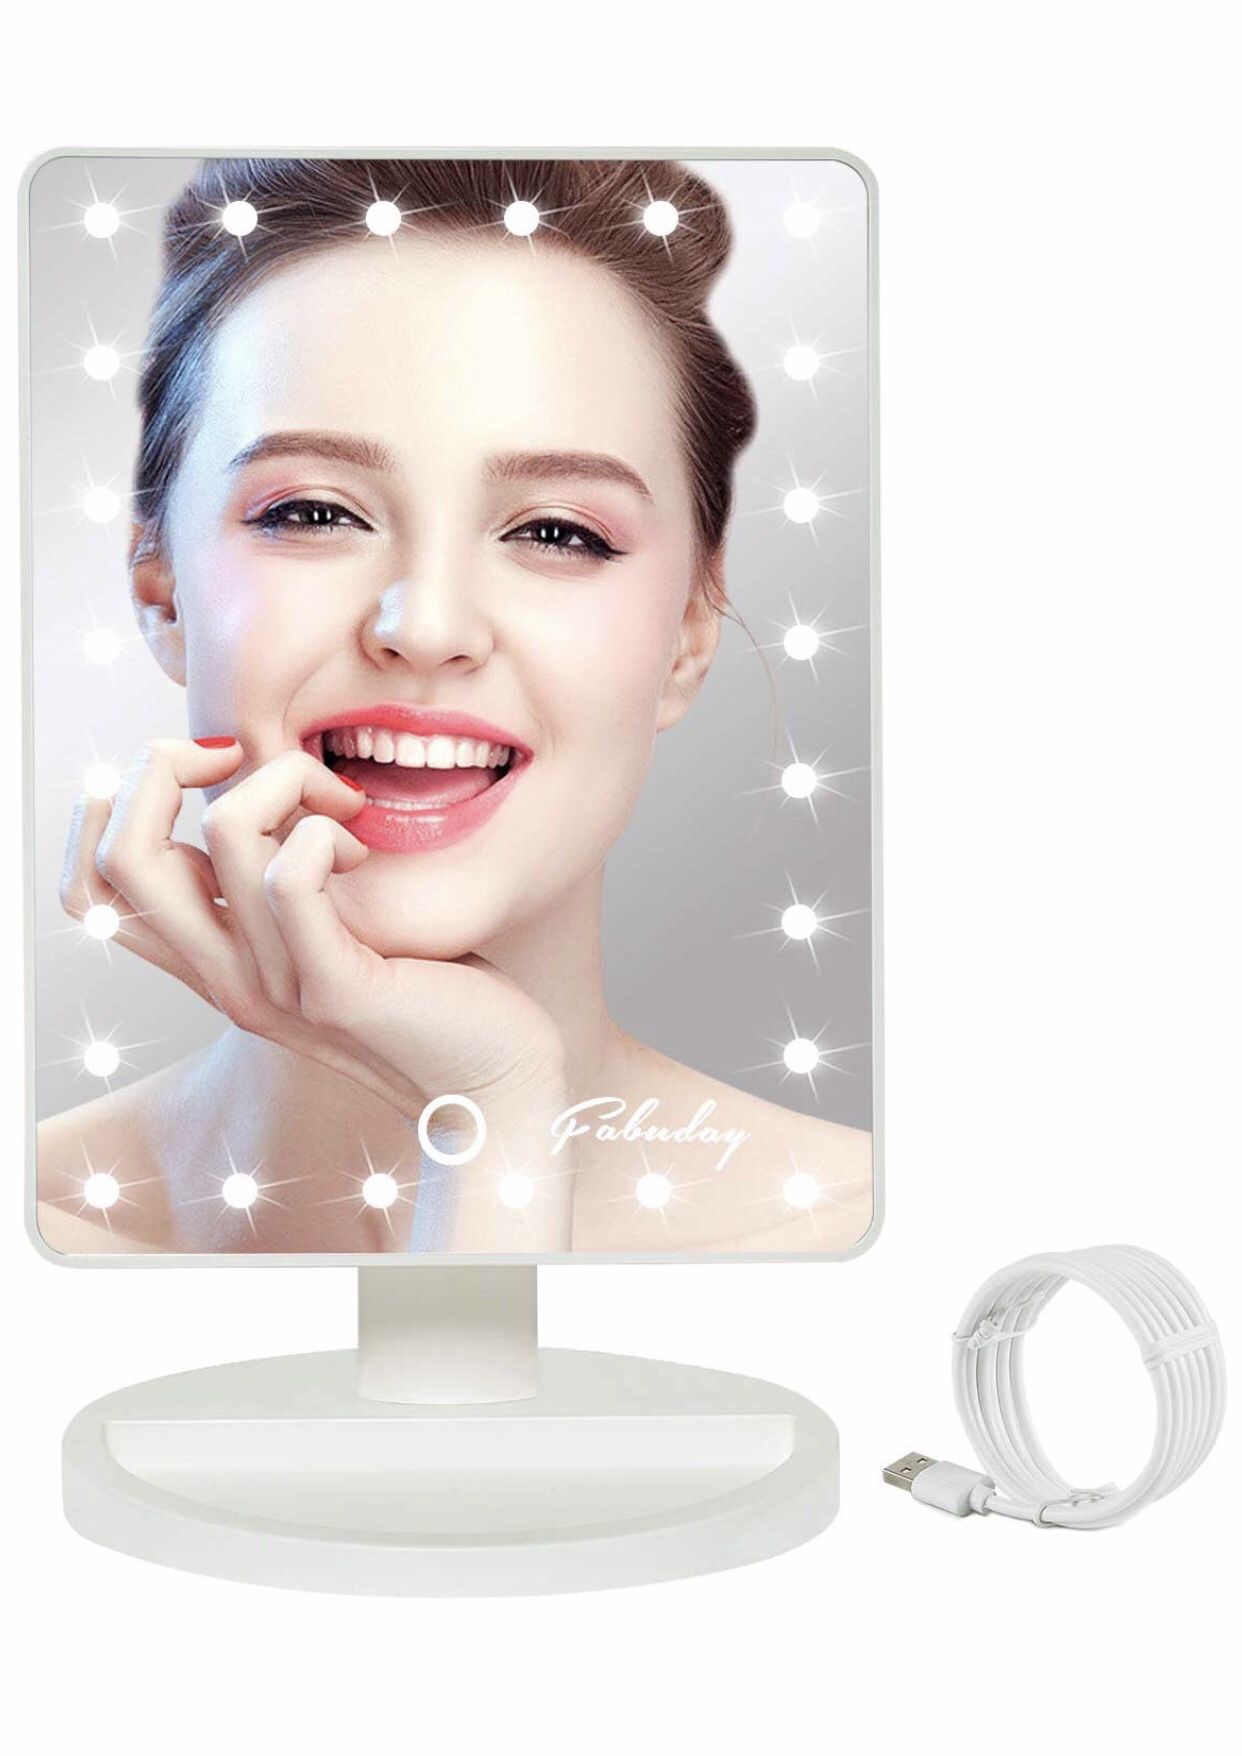 Brand new white LED Lighted Makeup Mirror 24 Led Vanity Cosmetic Mirror, Touch Screen Light Adjustable Diammable Dual Power Supply, 180° Rotation, le